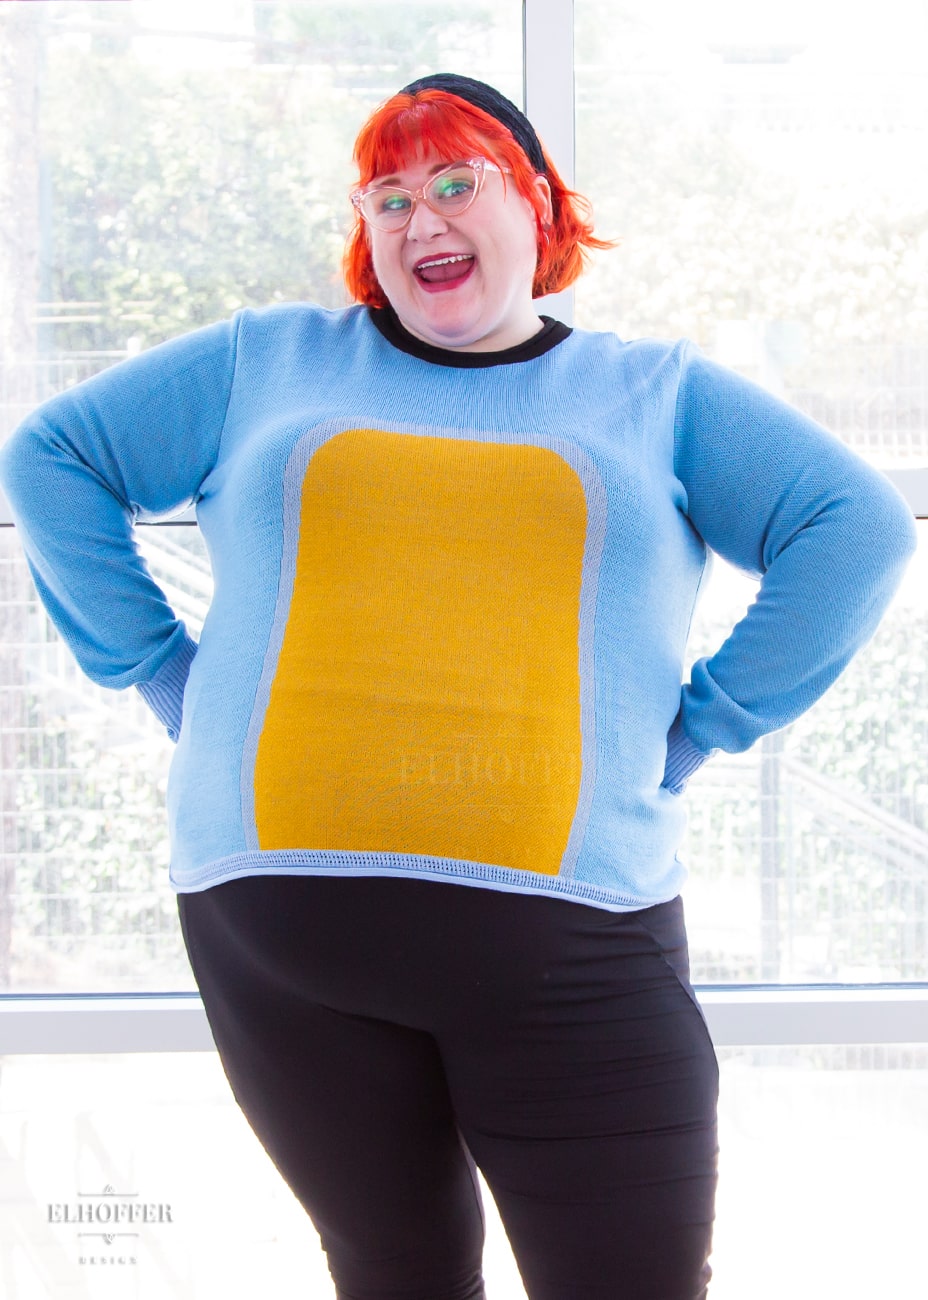 Logan, a fair skinned size 3XL model with short bright orange hair with bangs,  is wearing a fitted long sleeve knit sweater with wide crew neck and rolled edges and thumbholes in the sleeve. It is a medium blue with light blue cuffs and detail around the yellow oval in the middle of the sweater. It also has a black neck and black spot in the middle of the back.